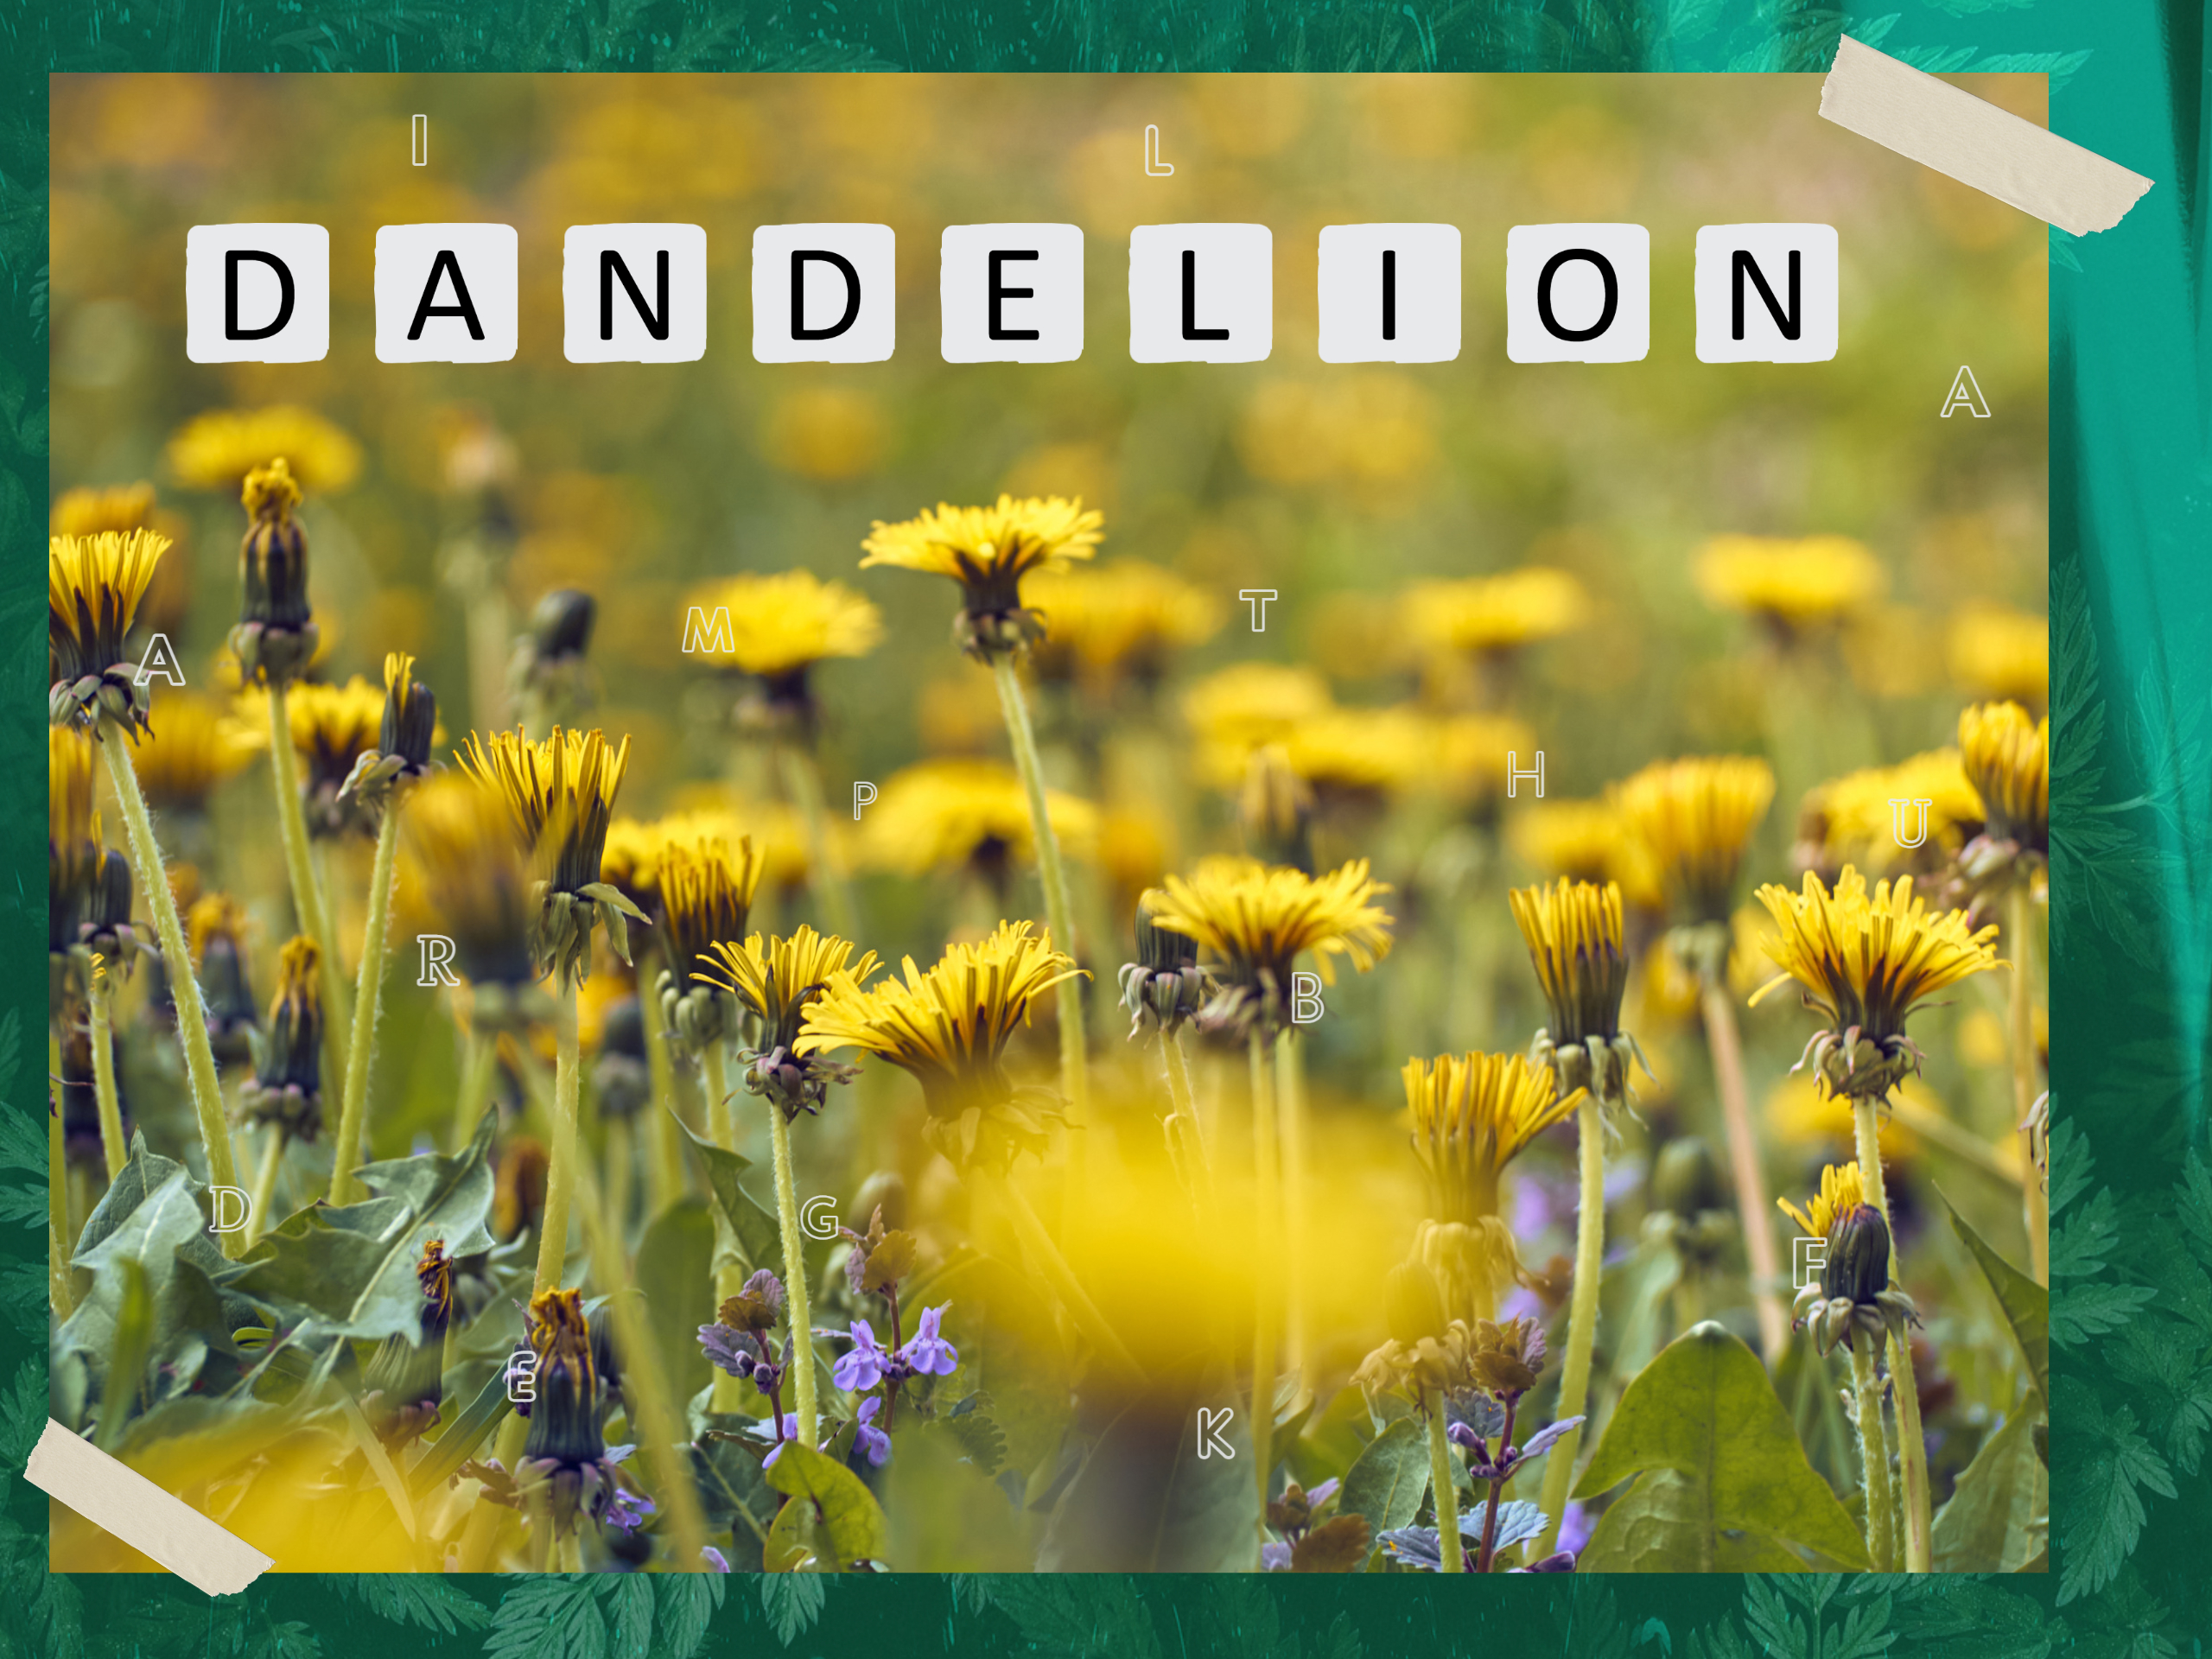 Photograph of dandelions with the word 'DANDELION'.